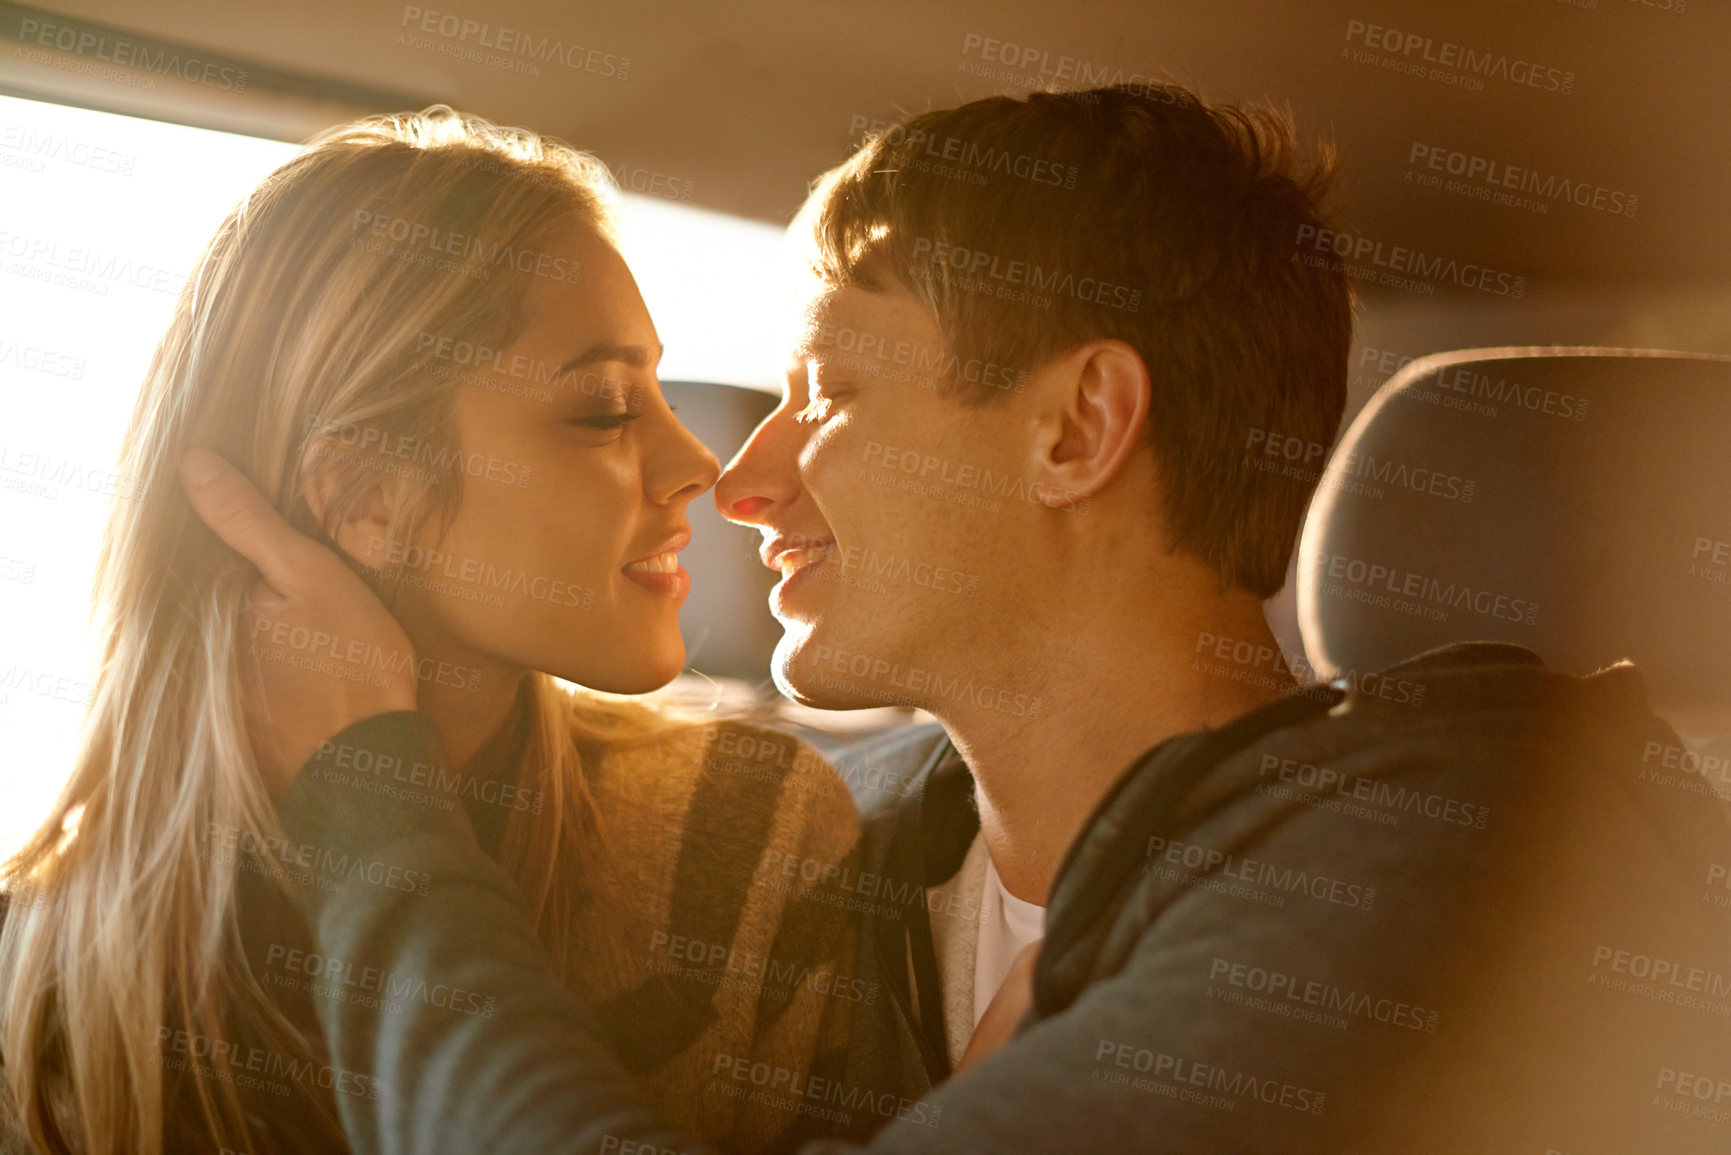 Buy stock photo Shot of an affectionate young couple about to kiss in a car